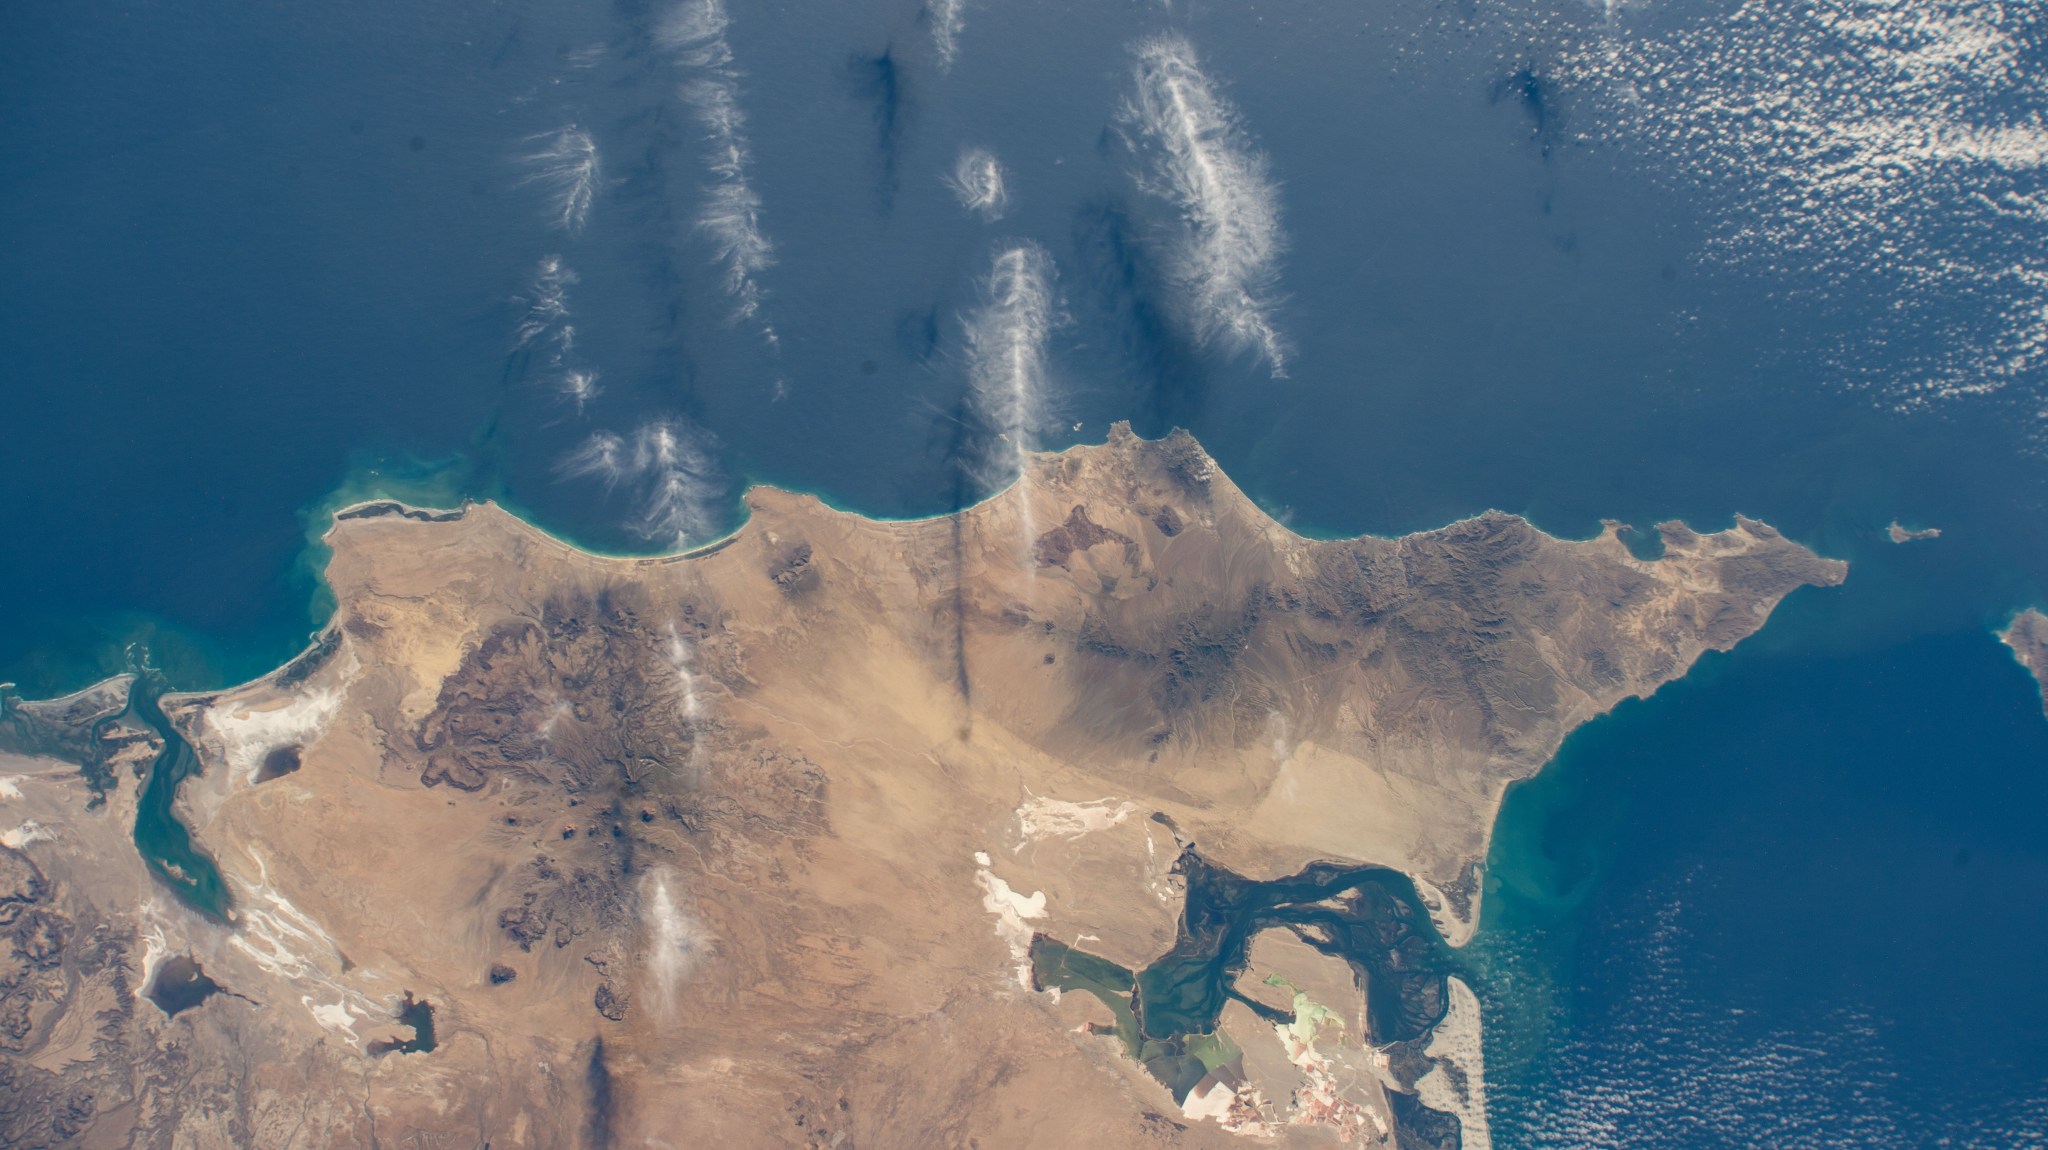 The north coast of the Mexican state of Baja California Sur on the Pacific Ocean is pictured from the International Space Station as it orbited 258 miles above.